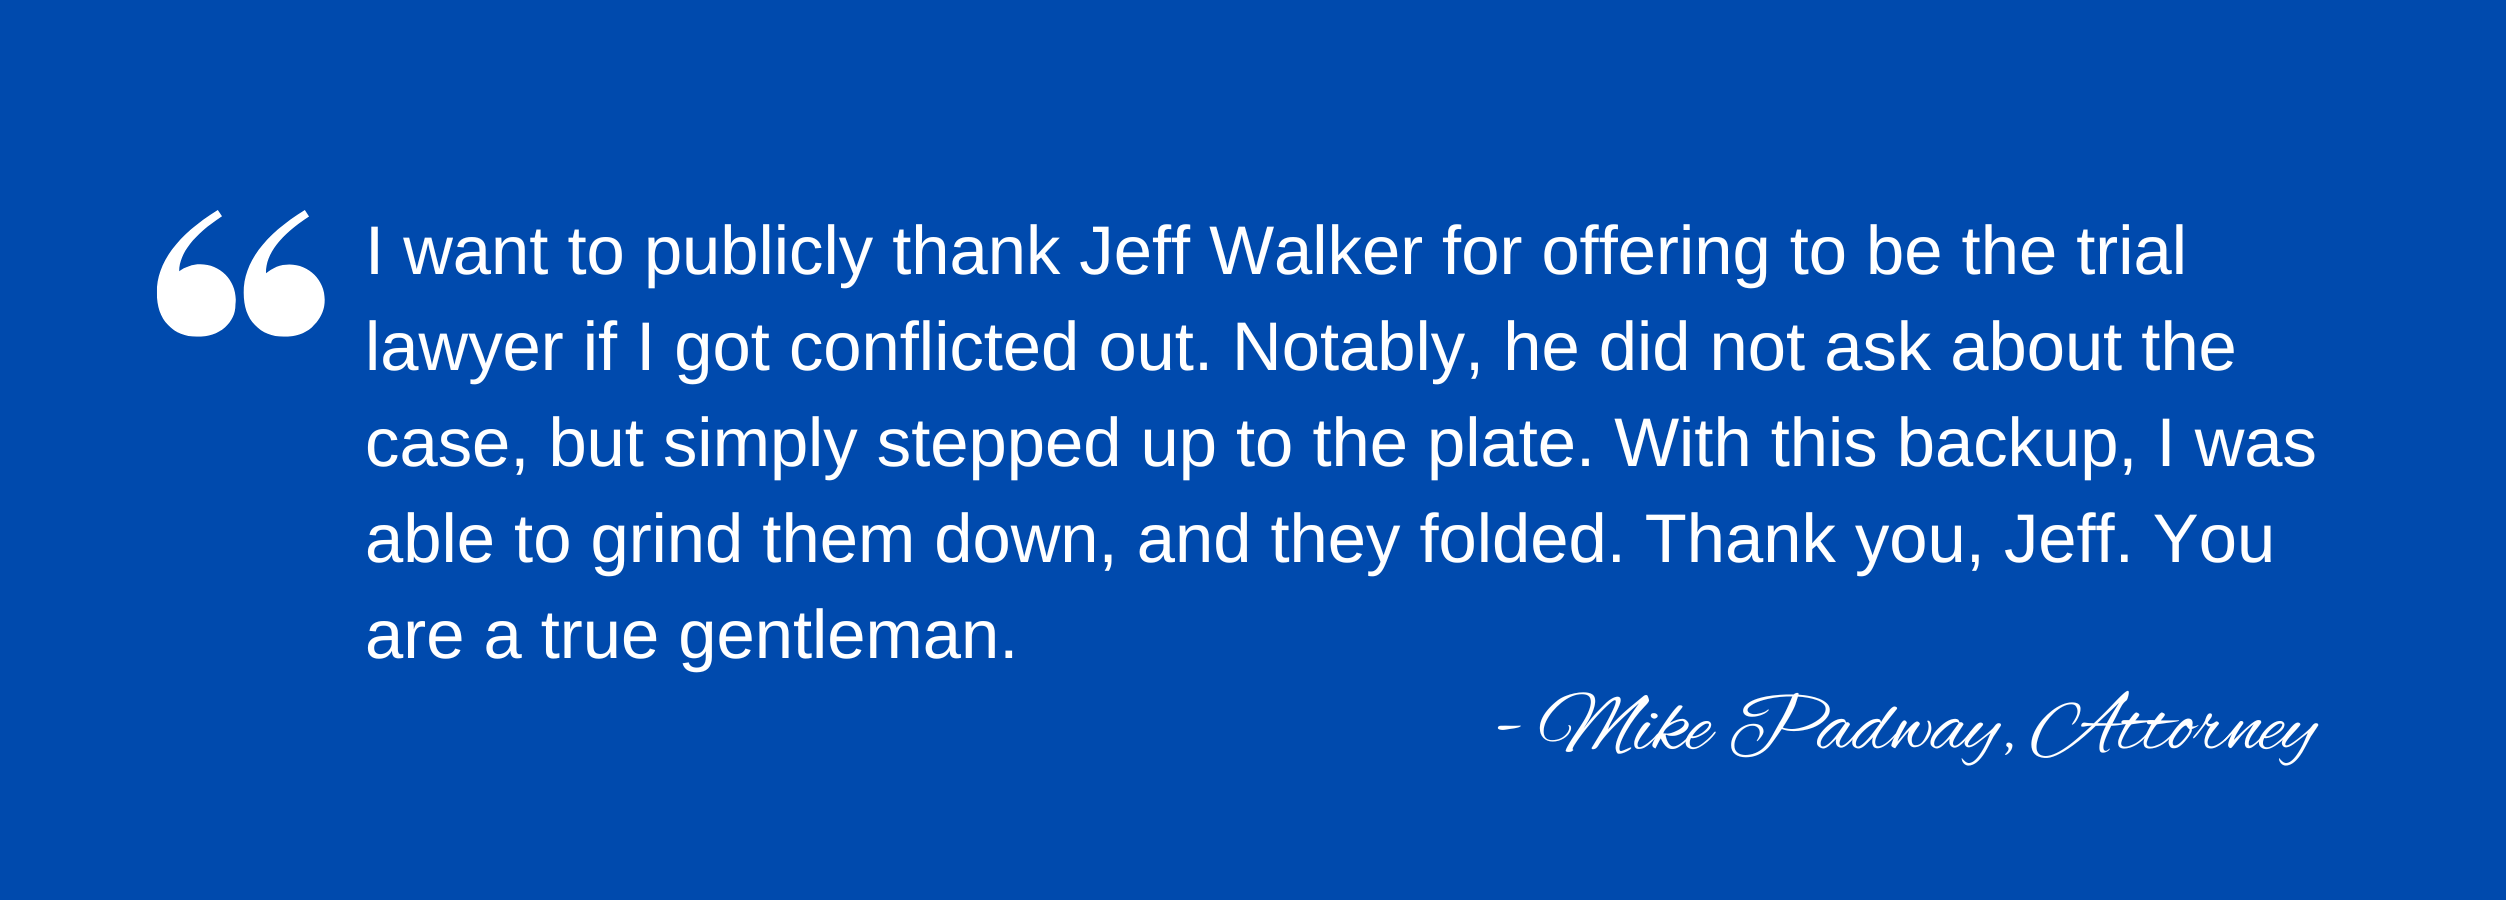 "I want to publicly thank Jeff Walker for offering to be the trial lawyer if I got conflicted out. Notably, he did not ask about the case, but simply stepped up to the plate. With this backup, I was able to grind them down, and they folded. Thank you, Jeff. You are a true gentleman." Mike Padway, Attorney